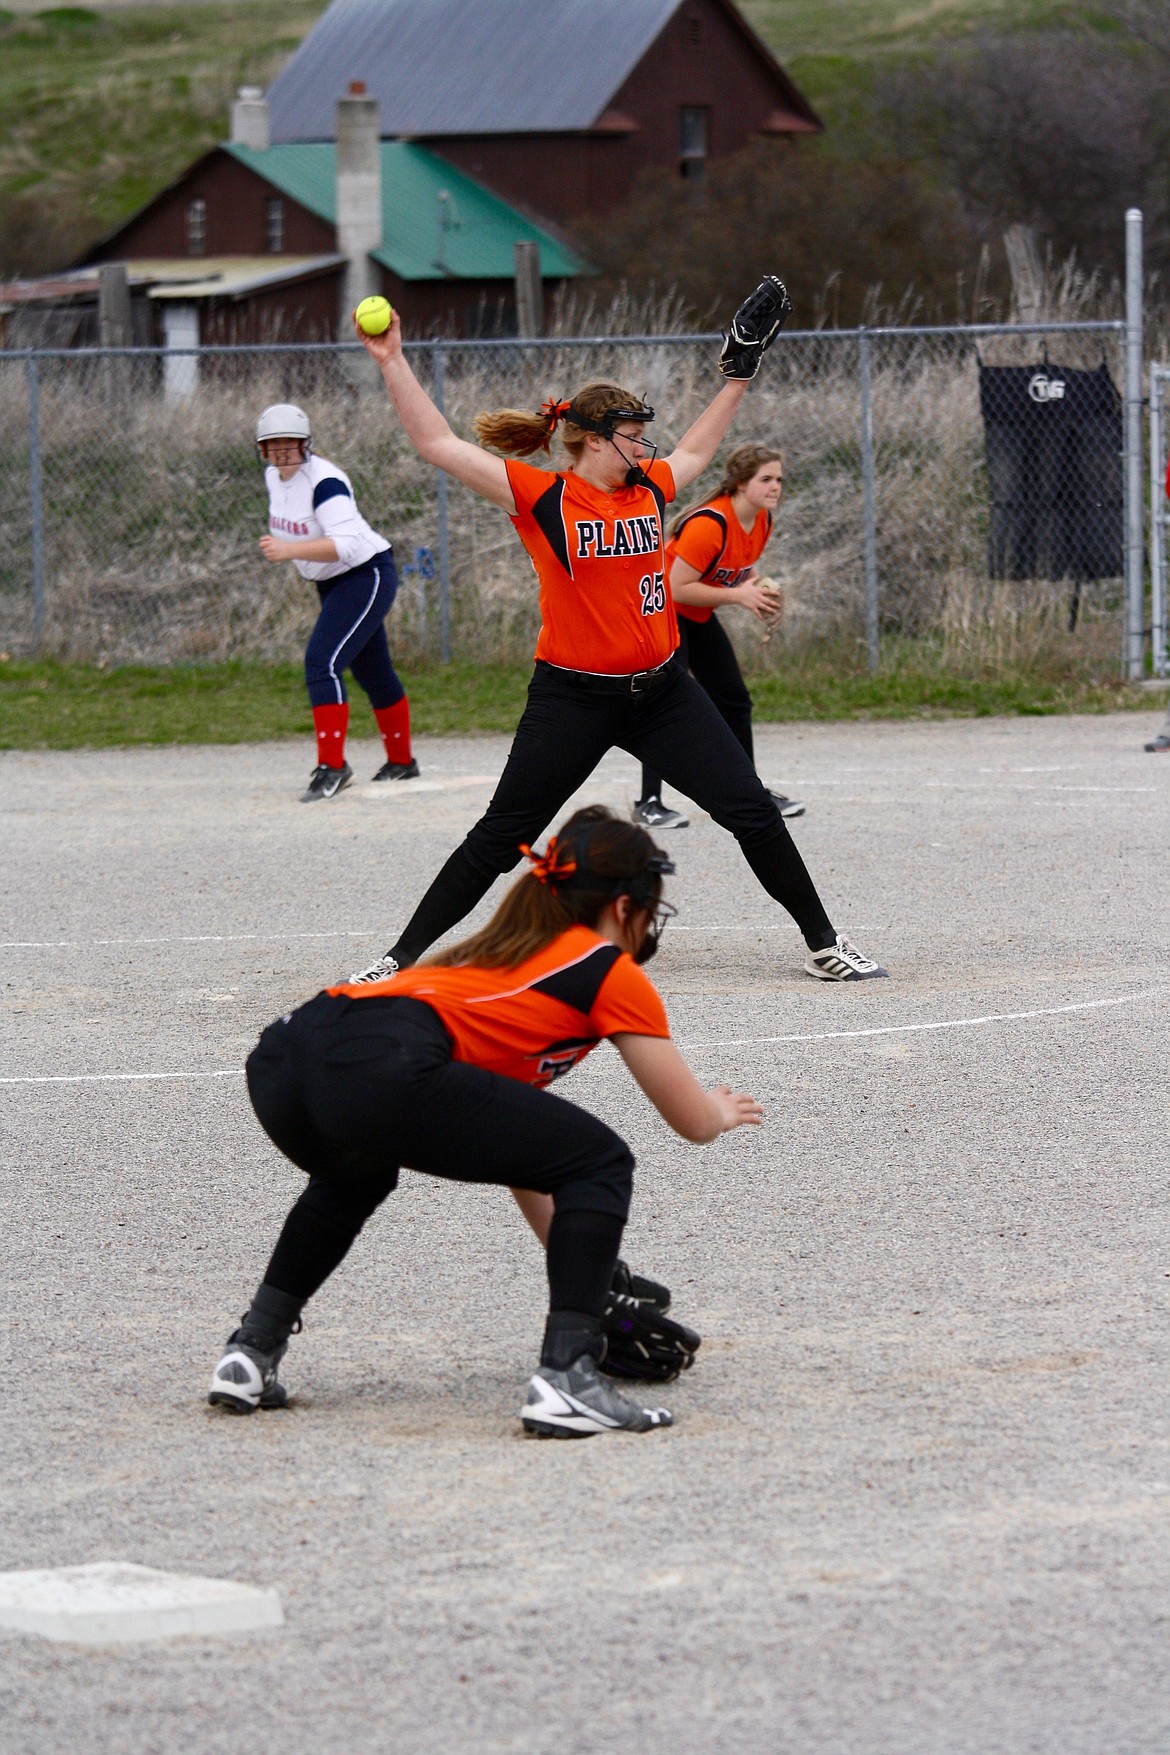 JESSICA THOMPSON (#25) of the Plains/Hot Springs Trotters fastpitch softball team winds up for a pitch with a Loyola runner on first. Third base and first base players are ready for any hit. (Douglas Wilks photos/Clark Fork Valley Press)